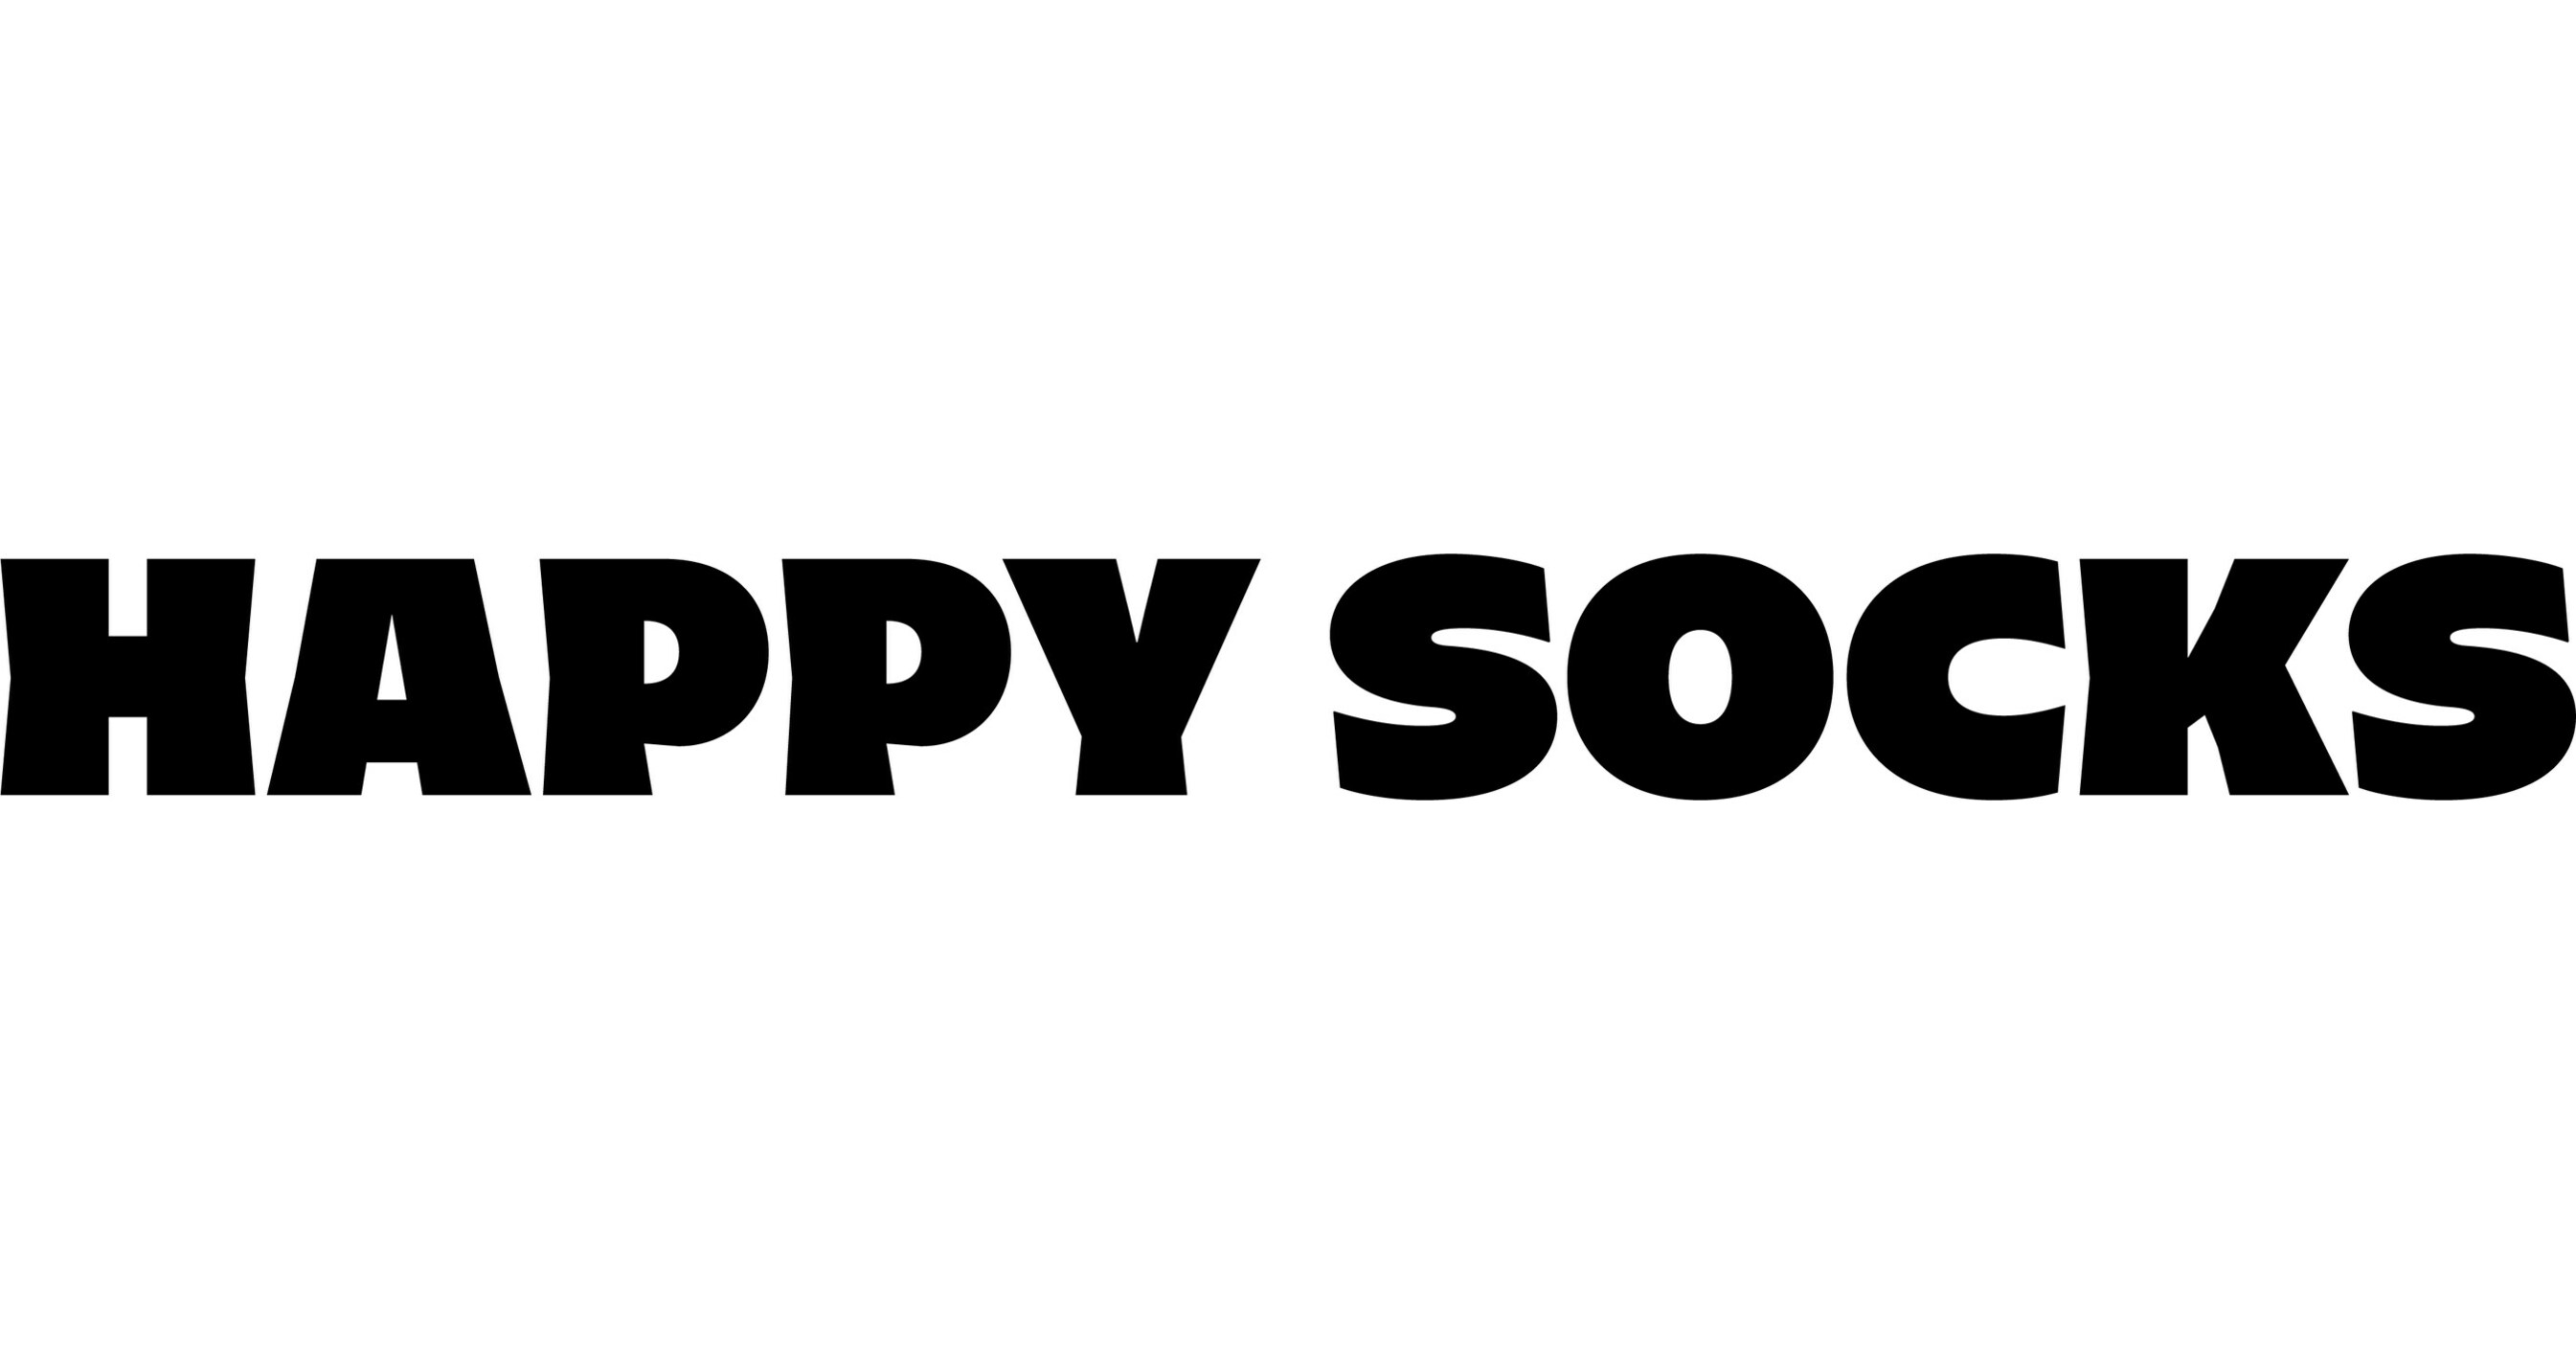 Happy Socks, Official Profile